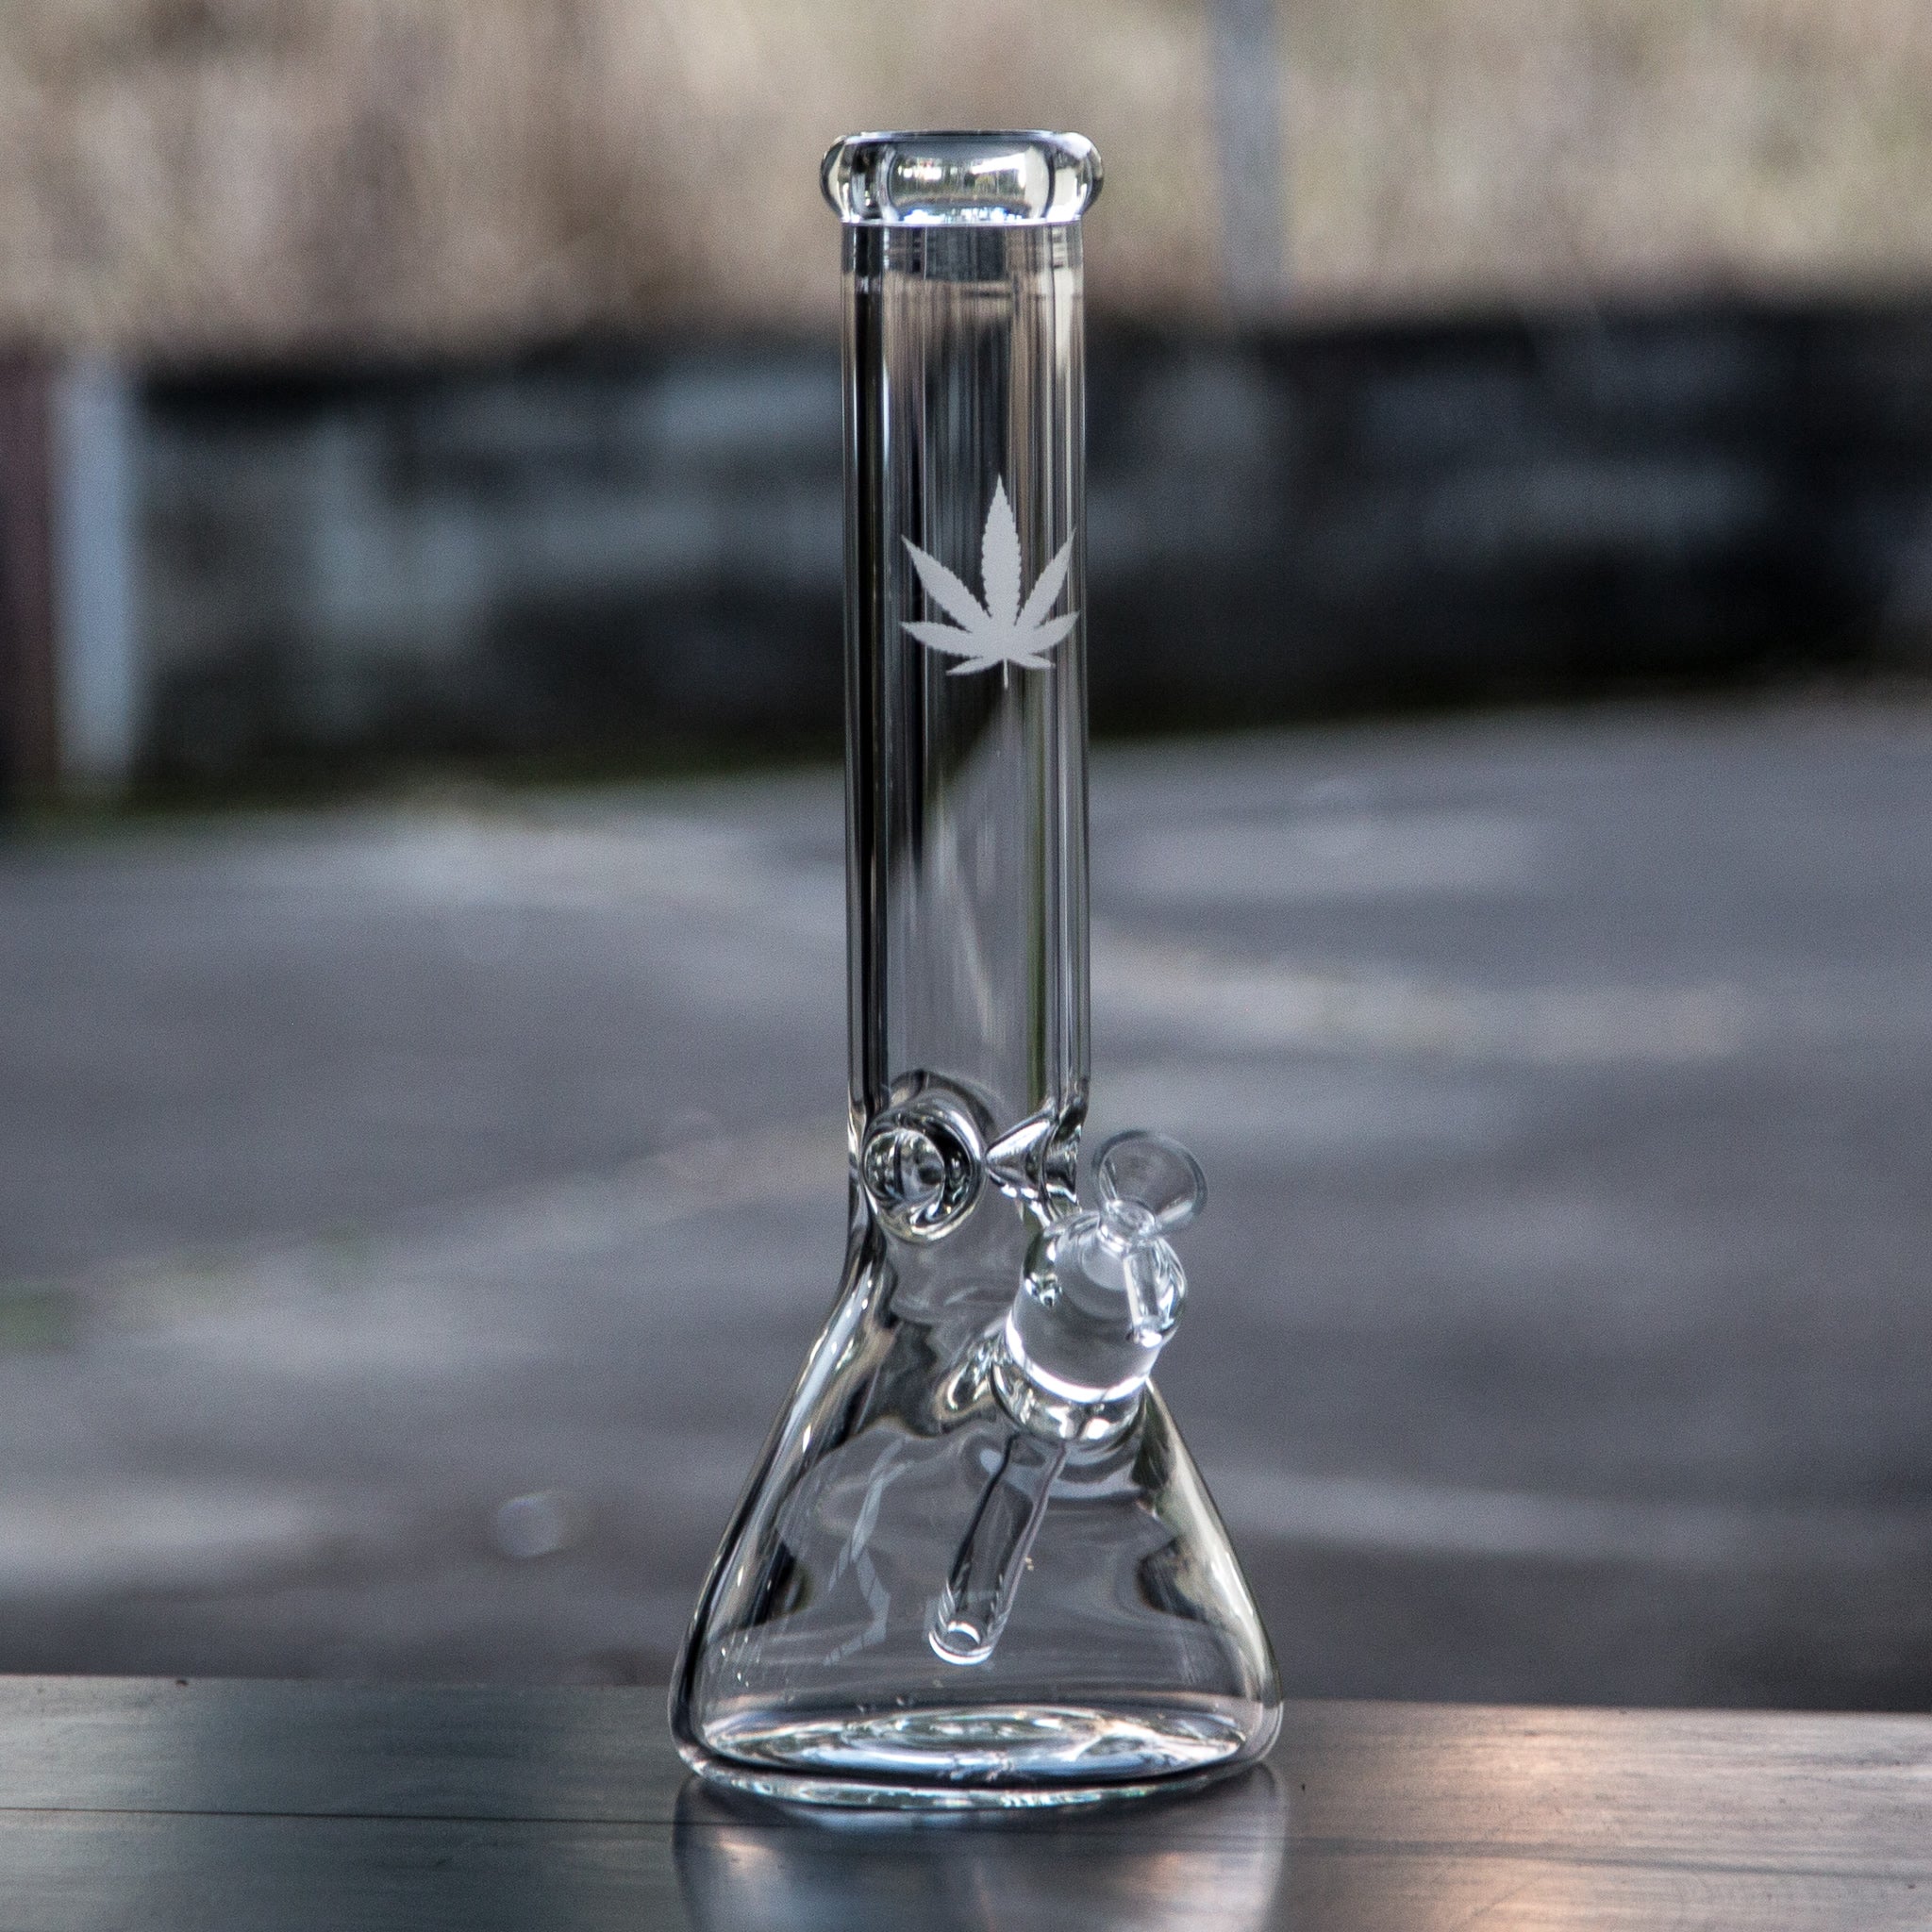 Cannabis leaf themed heavy and strong glass bong from Easy Bong Australia.